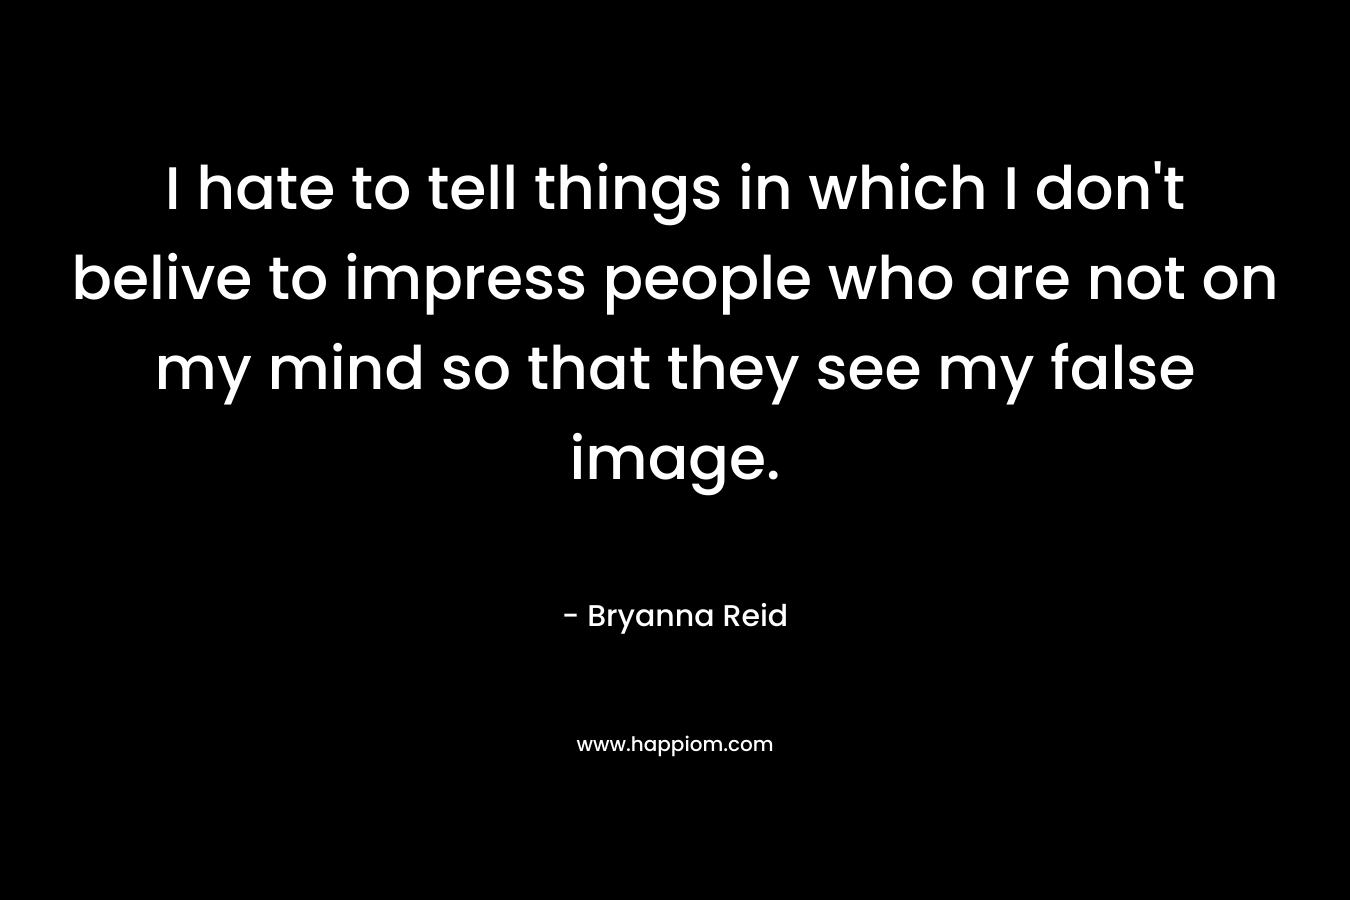 I hate to tell things in which I don't belive to impress people who are not on my mind so that they see my false image.